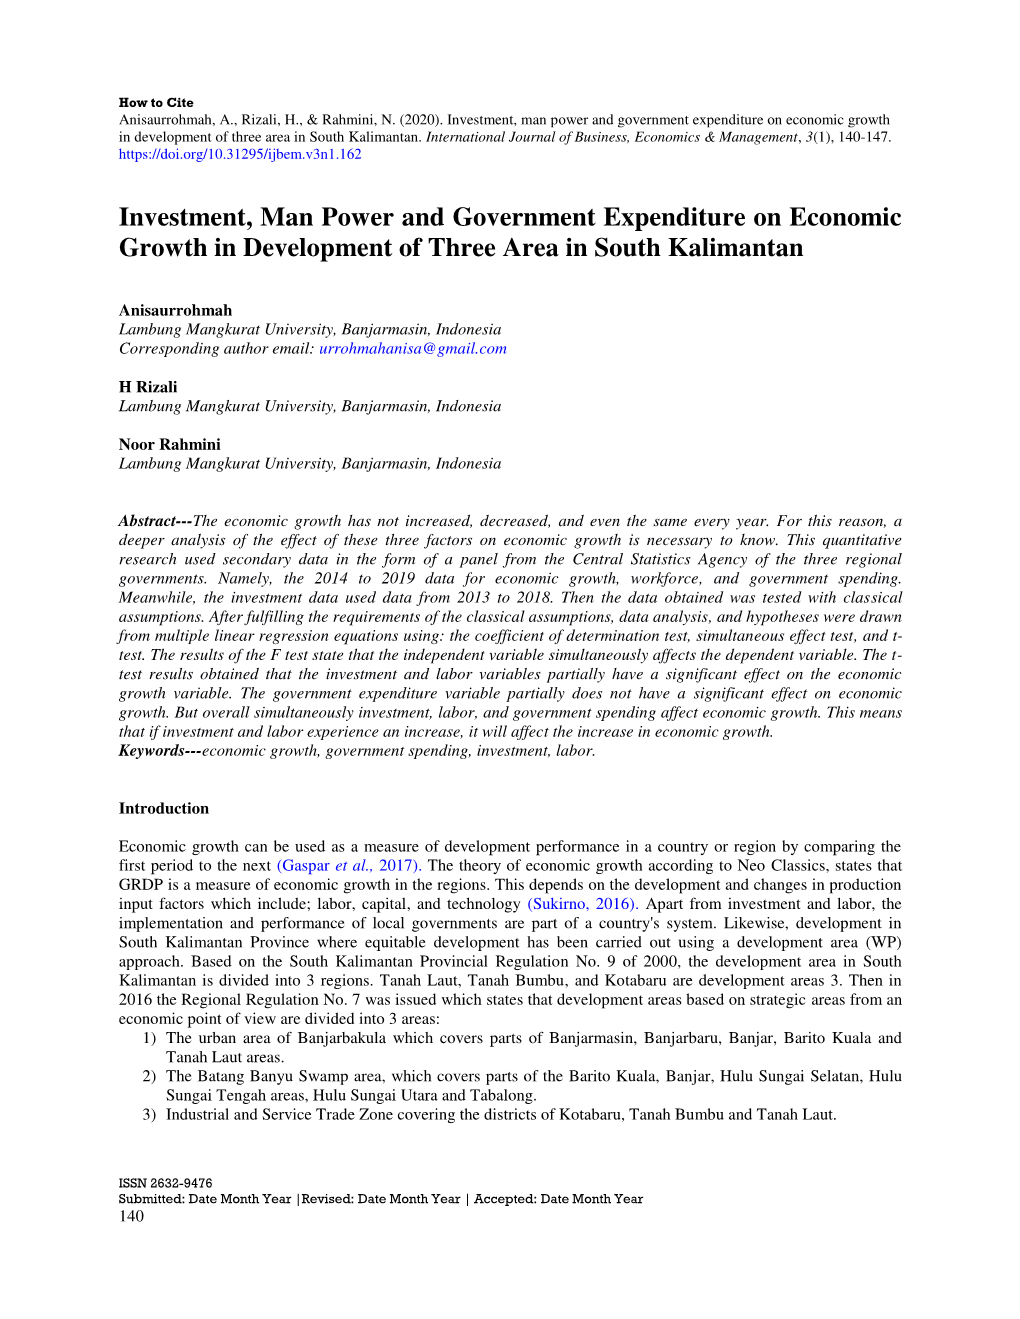 Investment, Man Power and Government Expenditure on Economic Growth in Development of Three Area in South Kalimantan